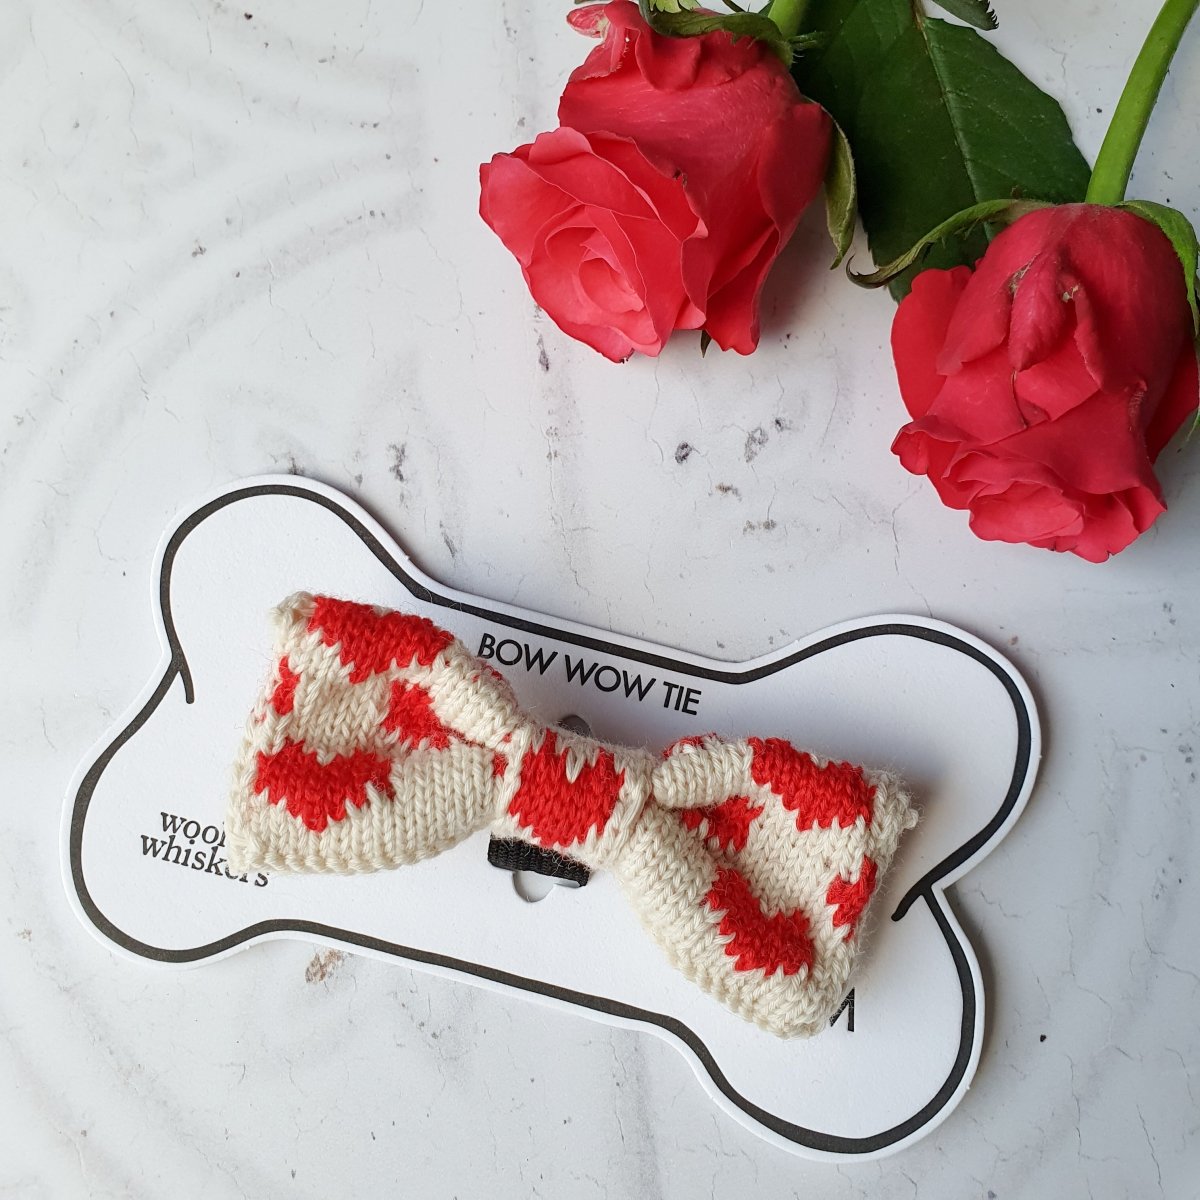 The Love Bow Tie (Cream + Red): Small - Medium Dog - Wool & Water